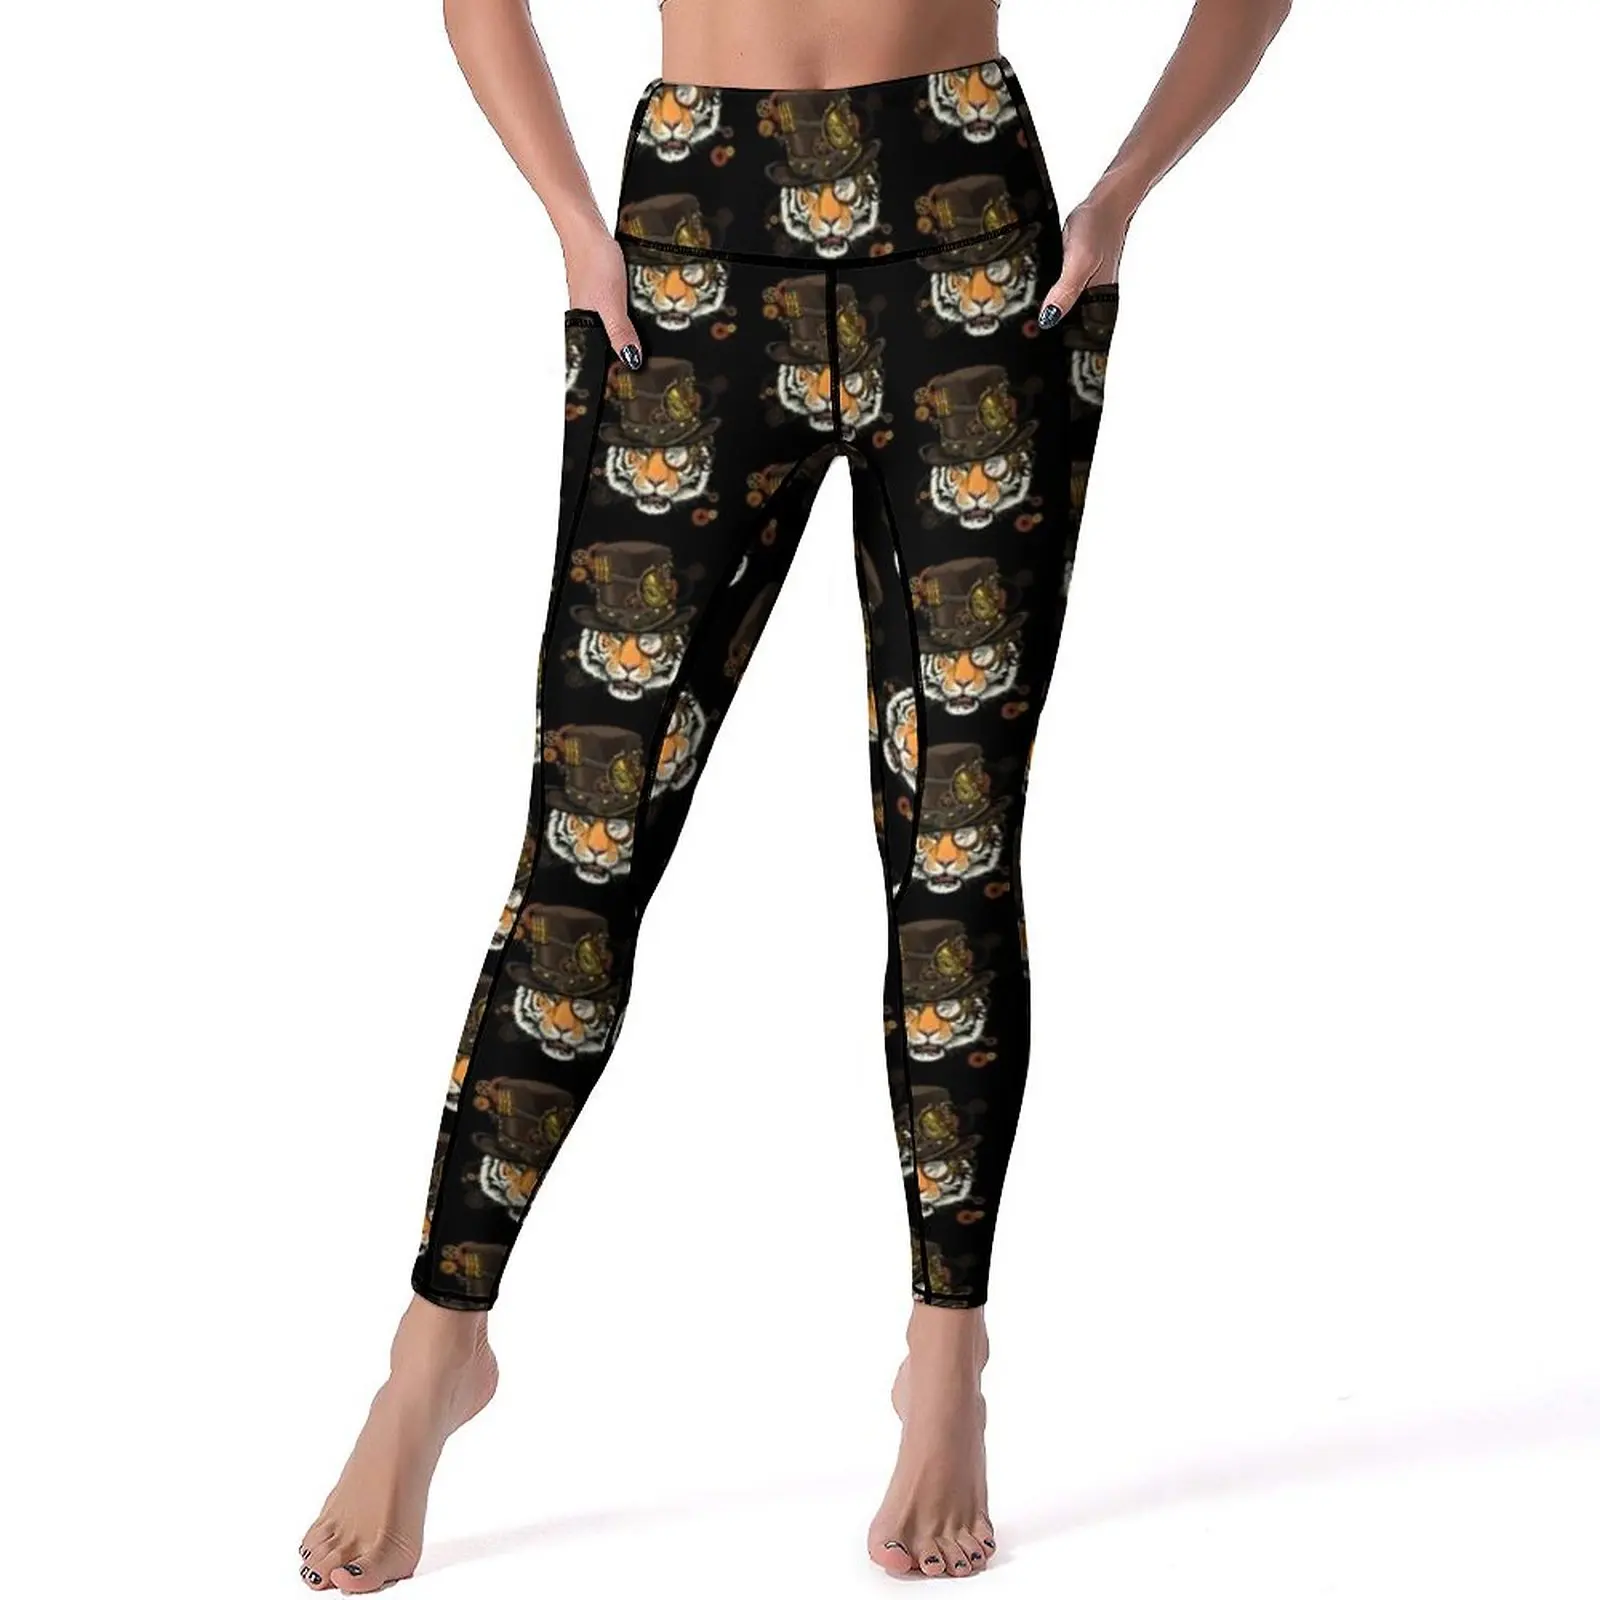 

Steampunk Tiger Leggings Sexy Medieval And Victorian Art Workout Gym Yoga Pants Push Up Quick-Dry Sport Legging Design Leggins